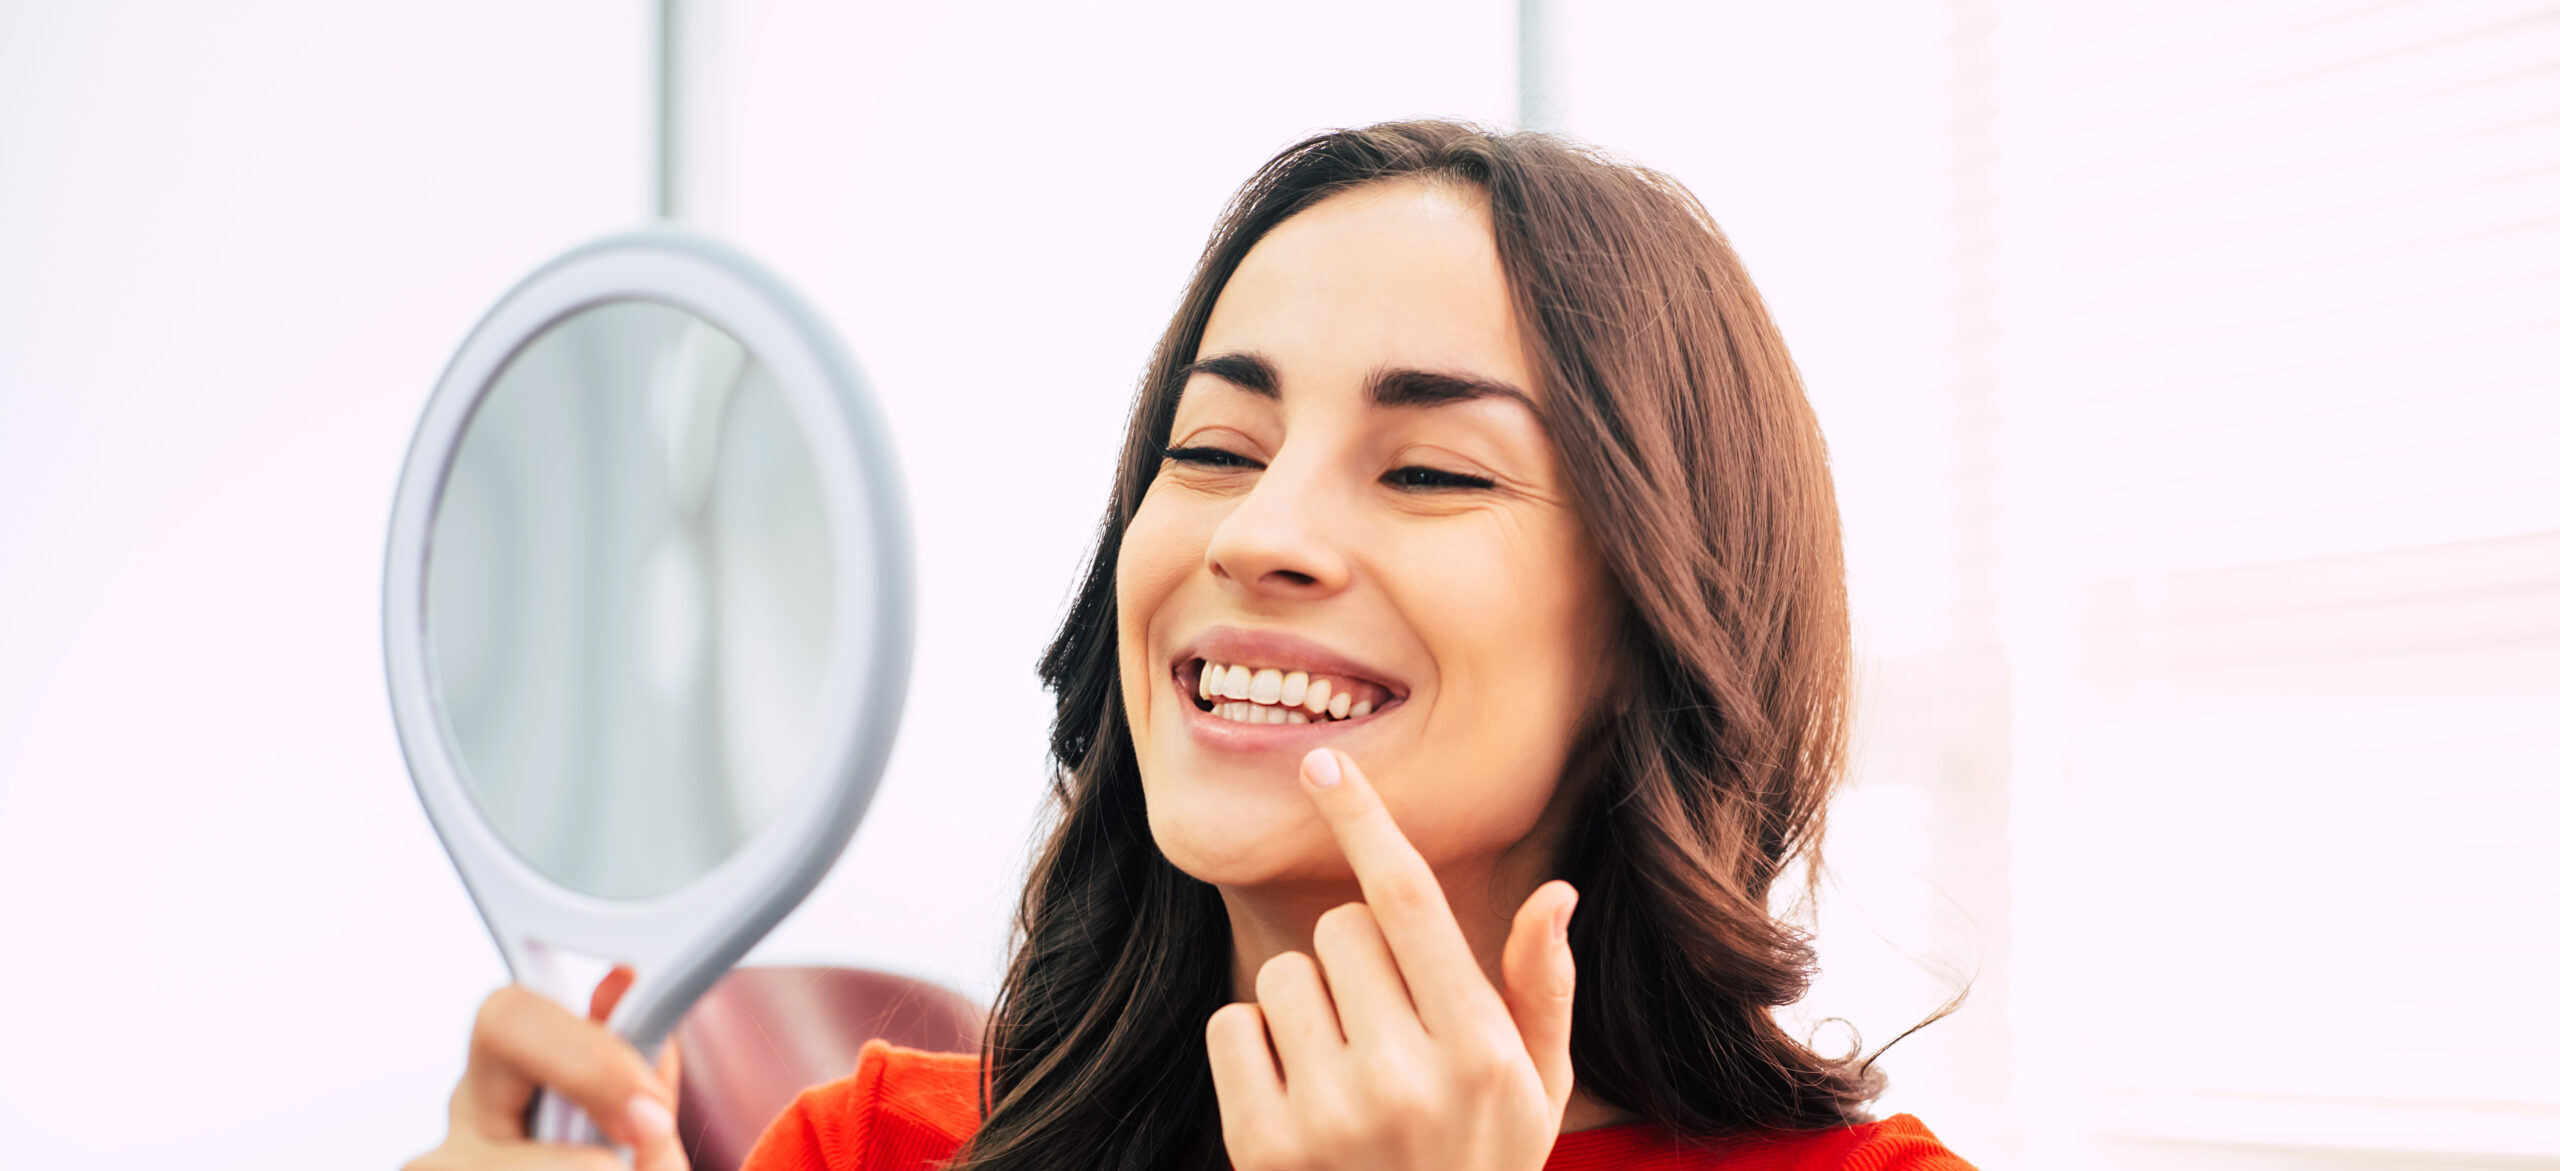 8 Great Ways to Improve Your Smile | Dentist in Columbus NE